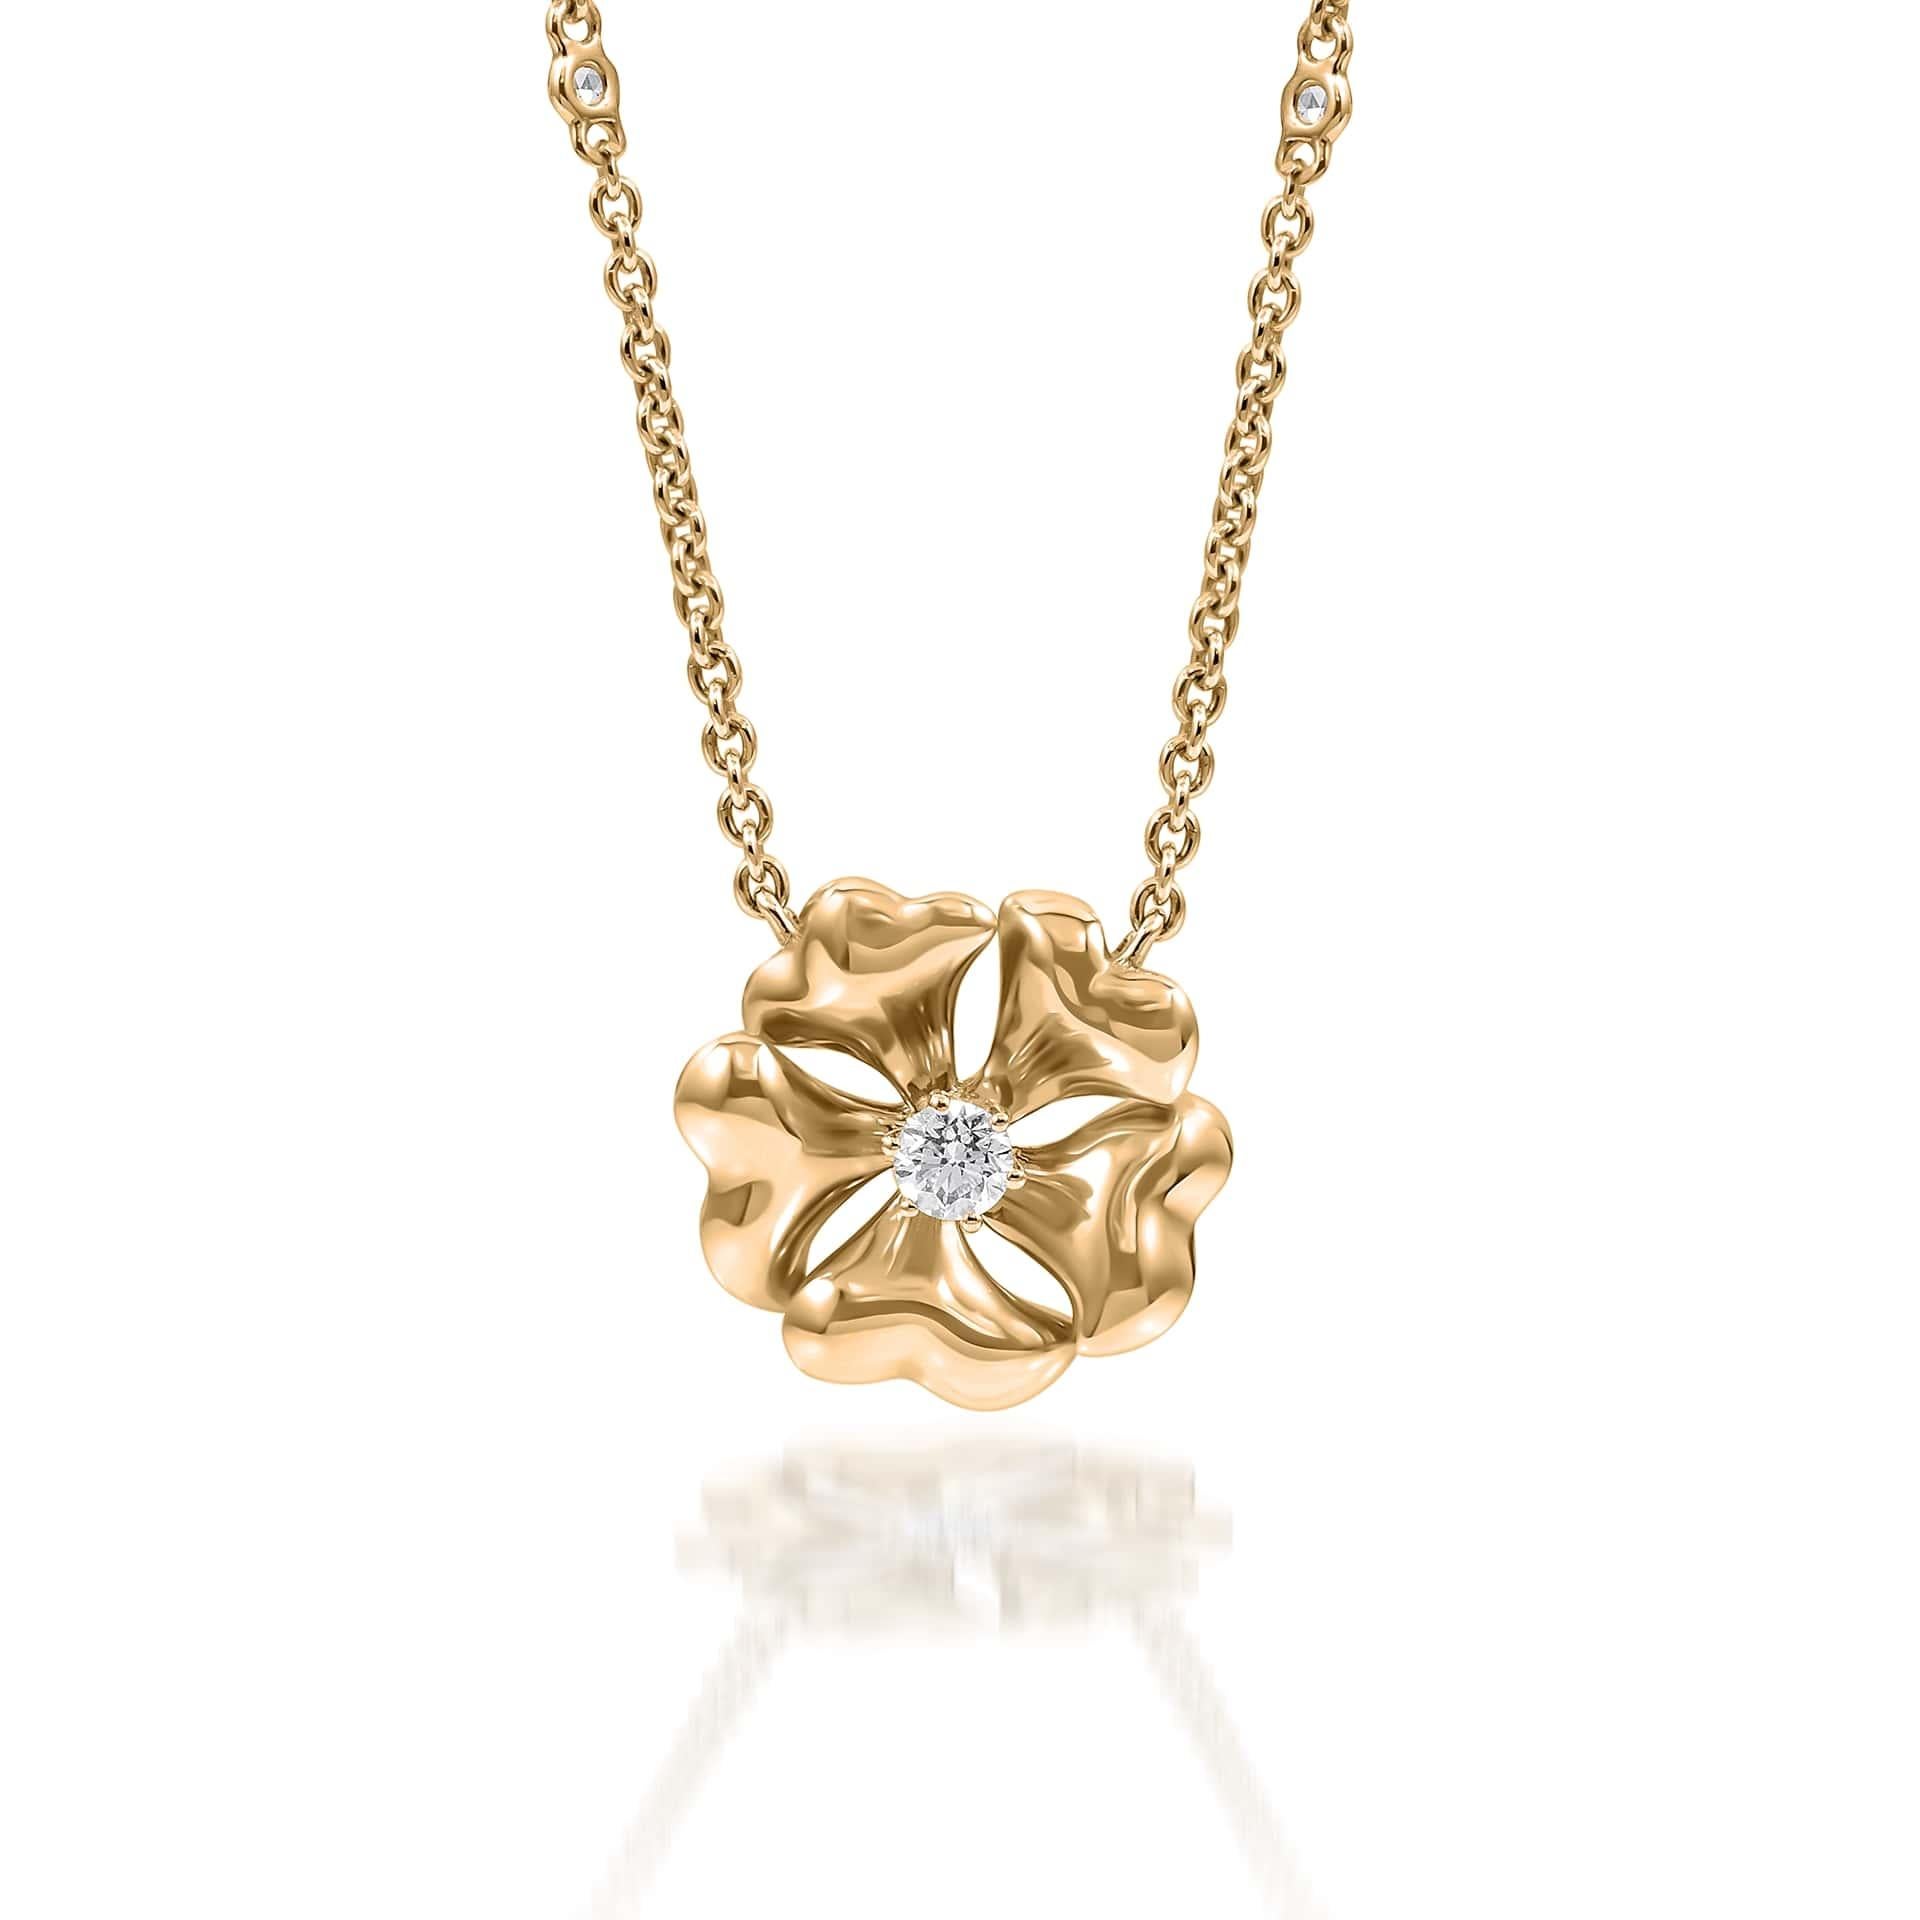 Bloom Gold and Diamond Flower Necklace in 18K Yellow Gold

Inspired by the exquisite petals of the alpine cinquefoil flower, the Bloom collection combines the richness of diamonds and precious metals with the light versatility of this delicate,